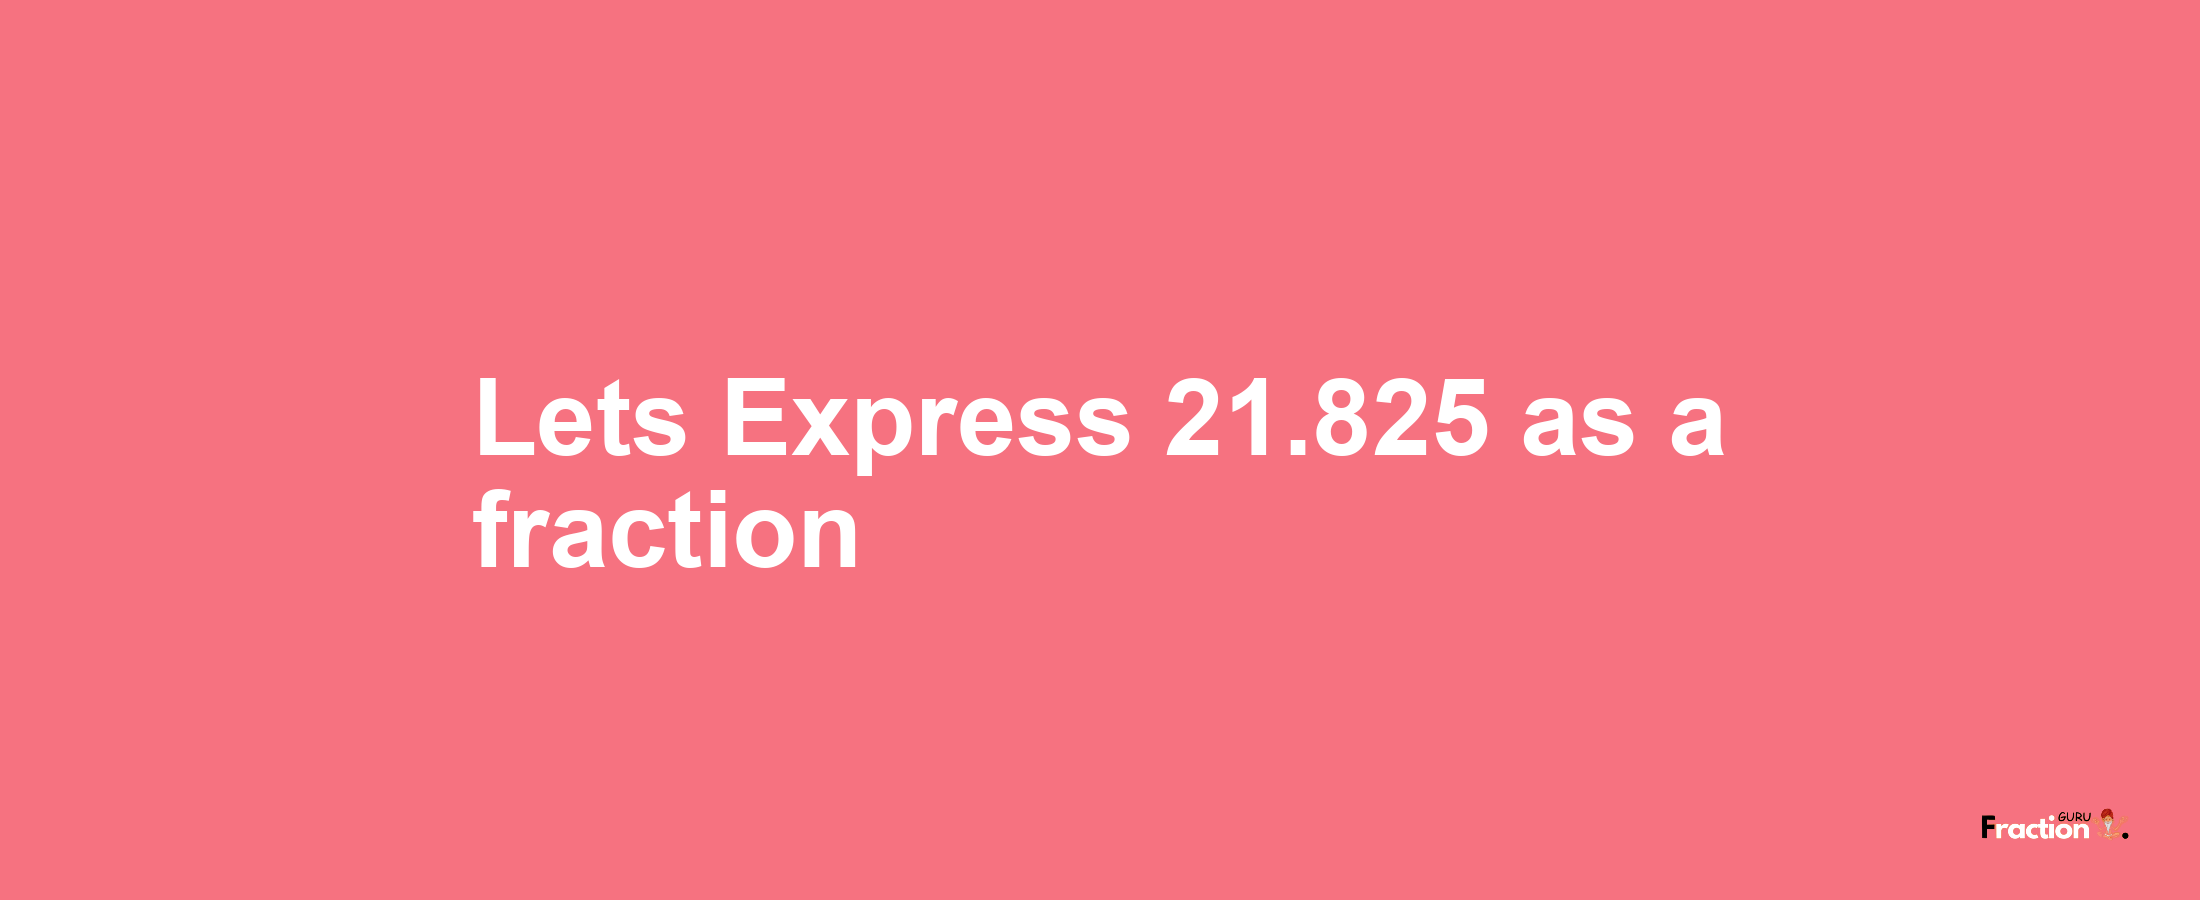 Lets Express 21.825 as afraction